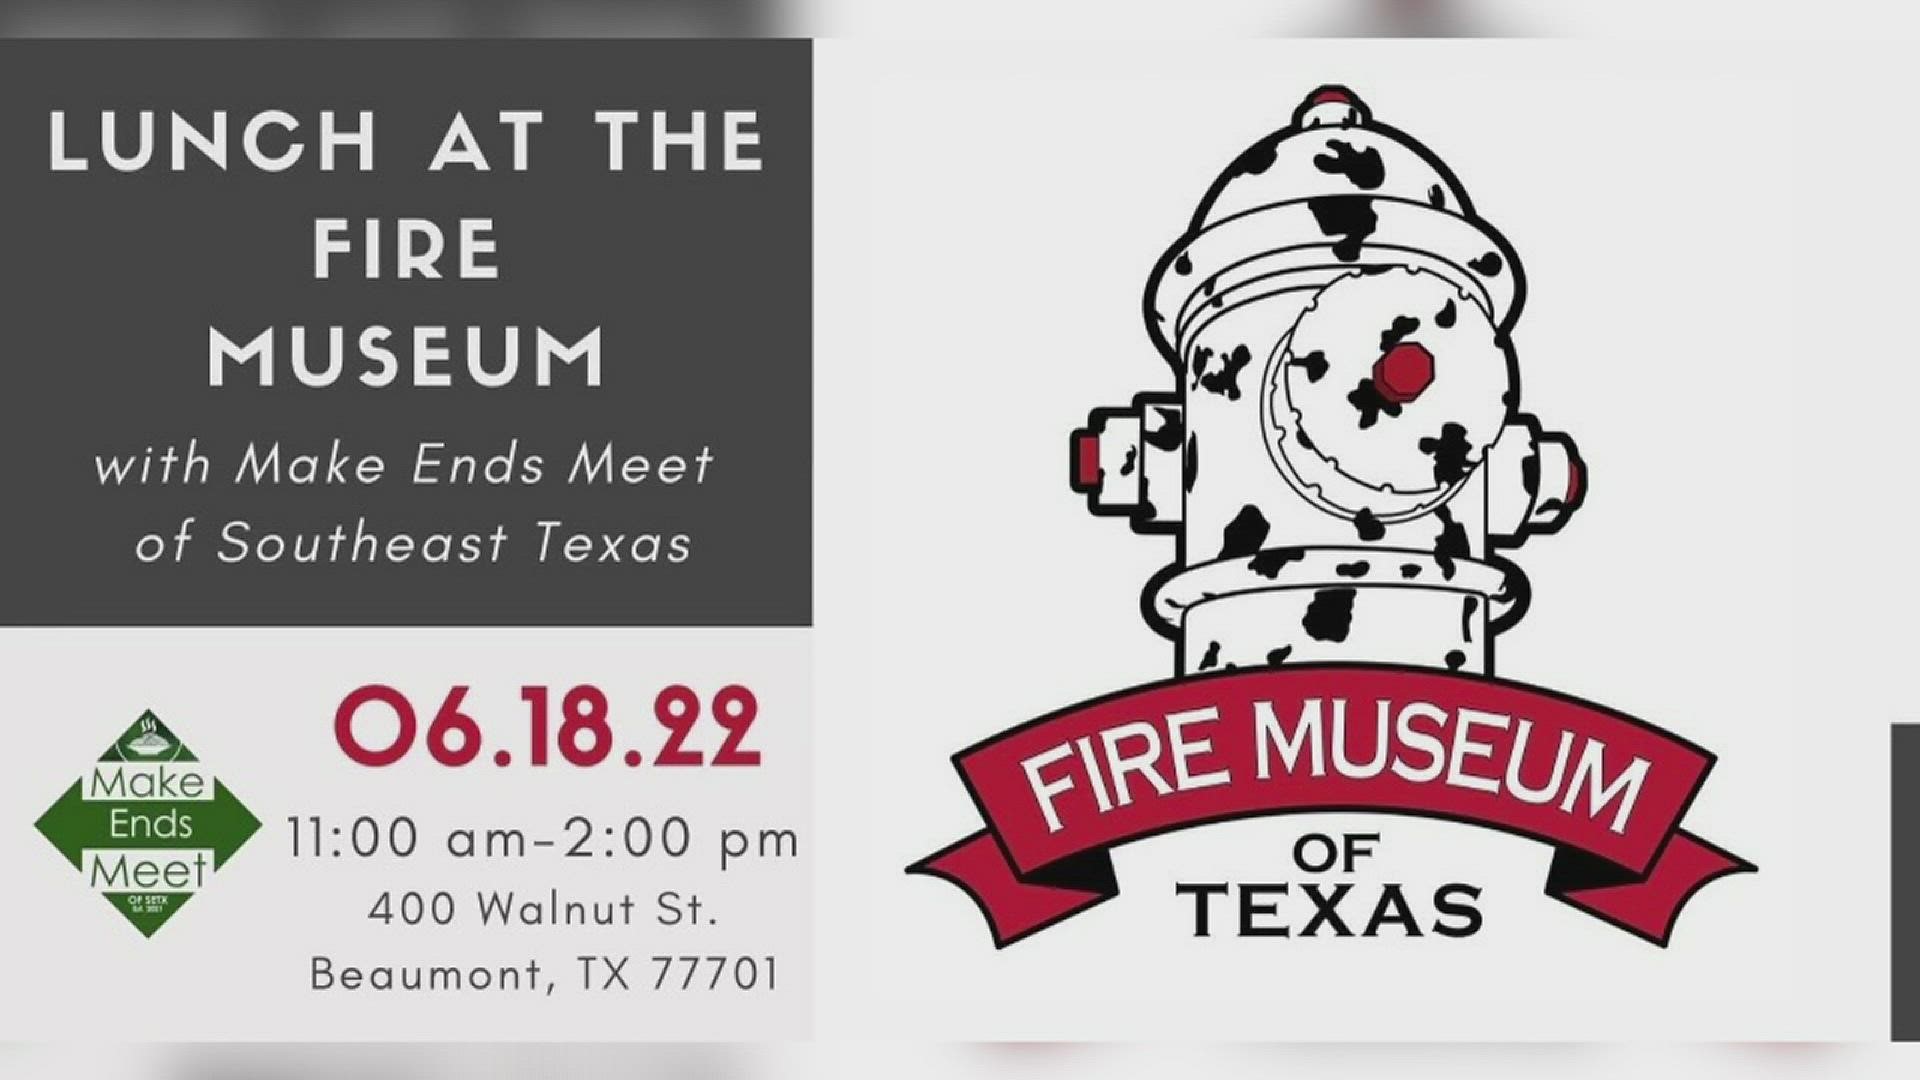 Make Ends Meet is partnering with the Fire Museum Saturday to host lunch at the museum from 11 a.m. to 2 p.m.